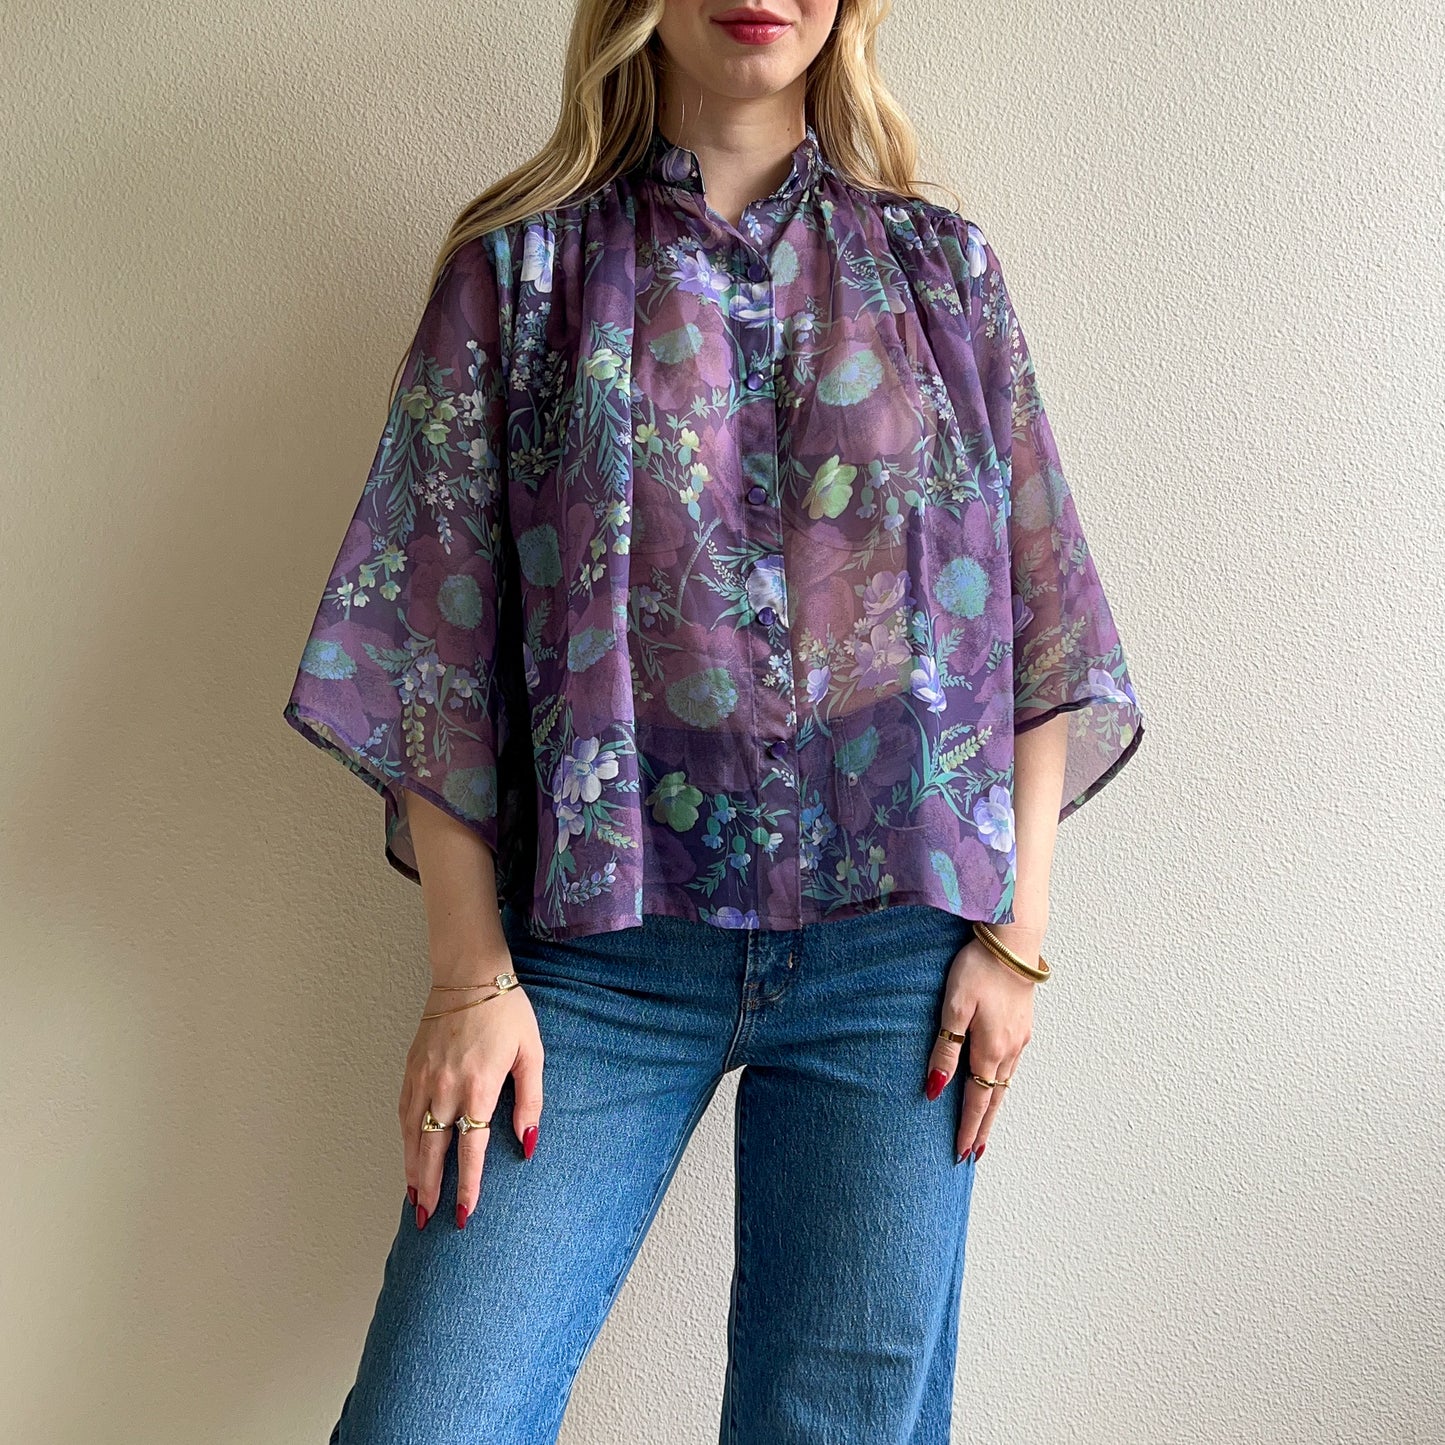 Sheer 1970s Purple and Blue Floral Blouse (L/XL)